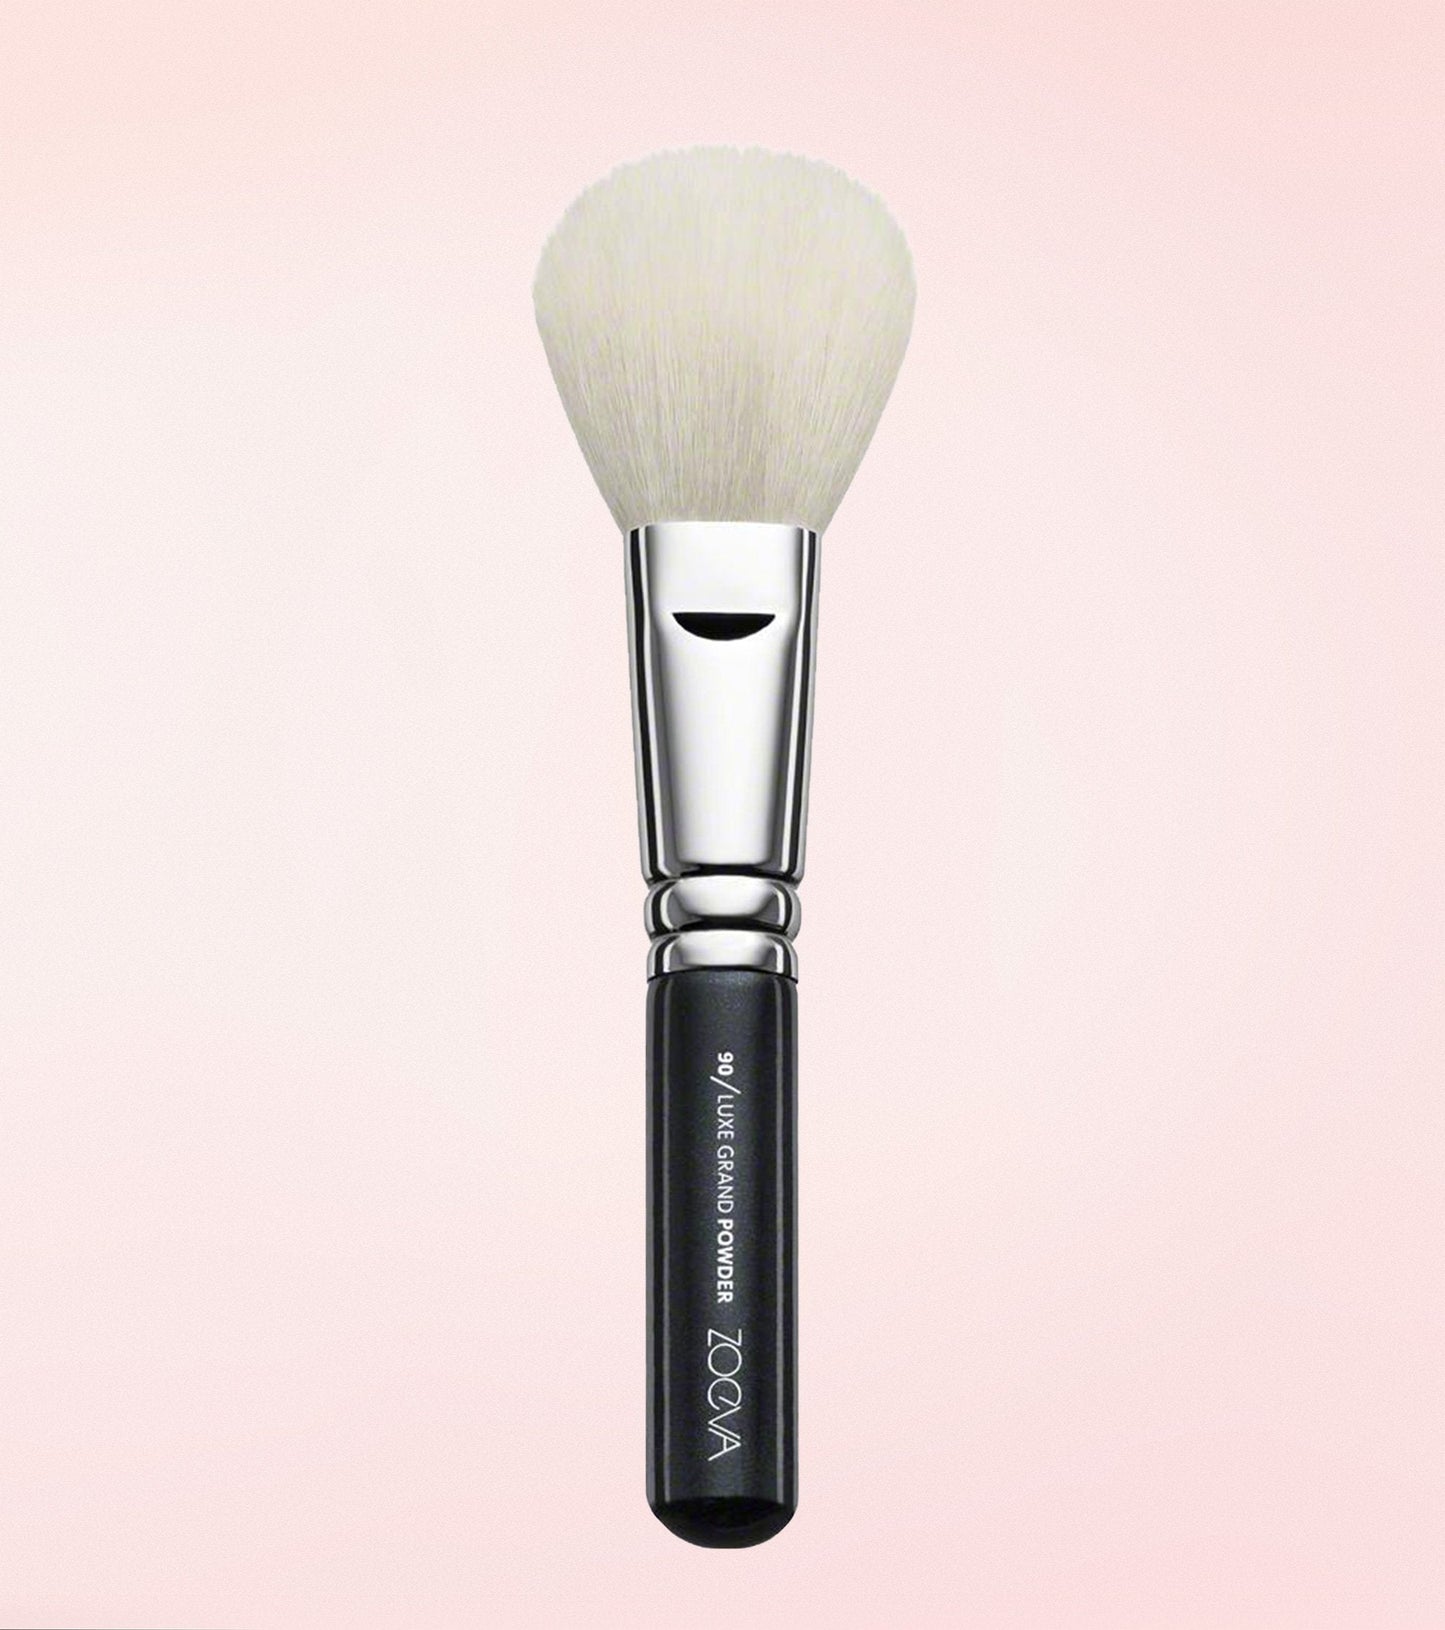 090 Luxe Grand Powder Brush Expanded Image 1